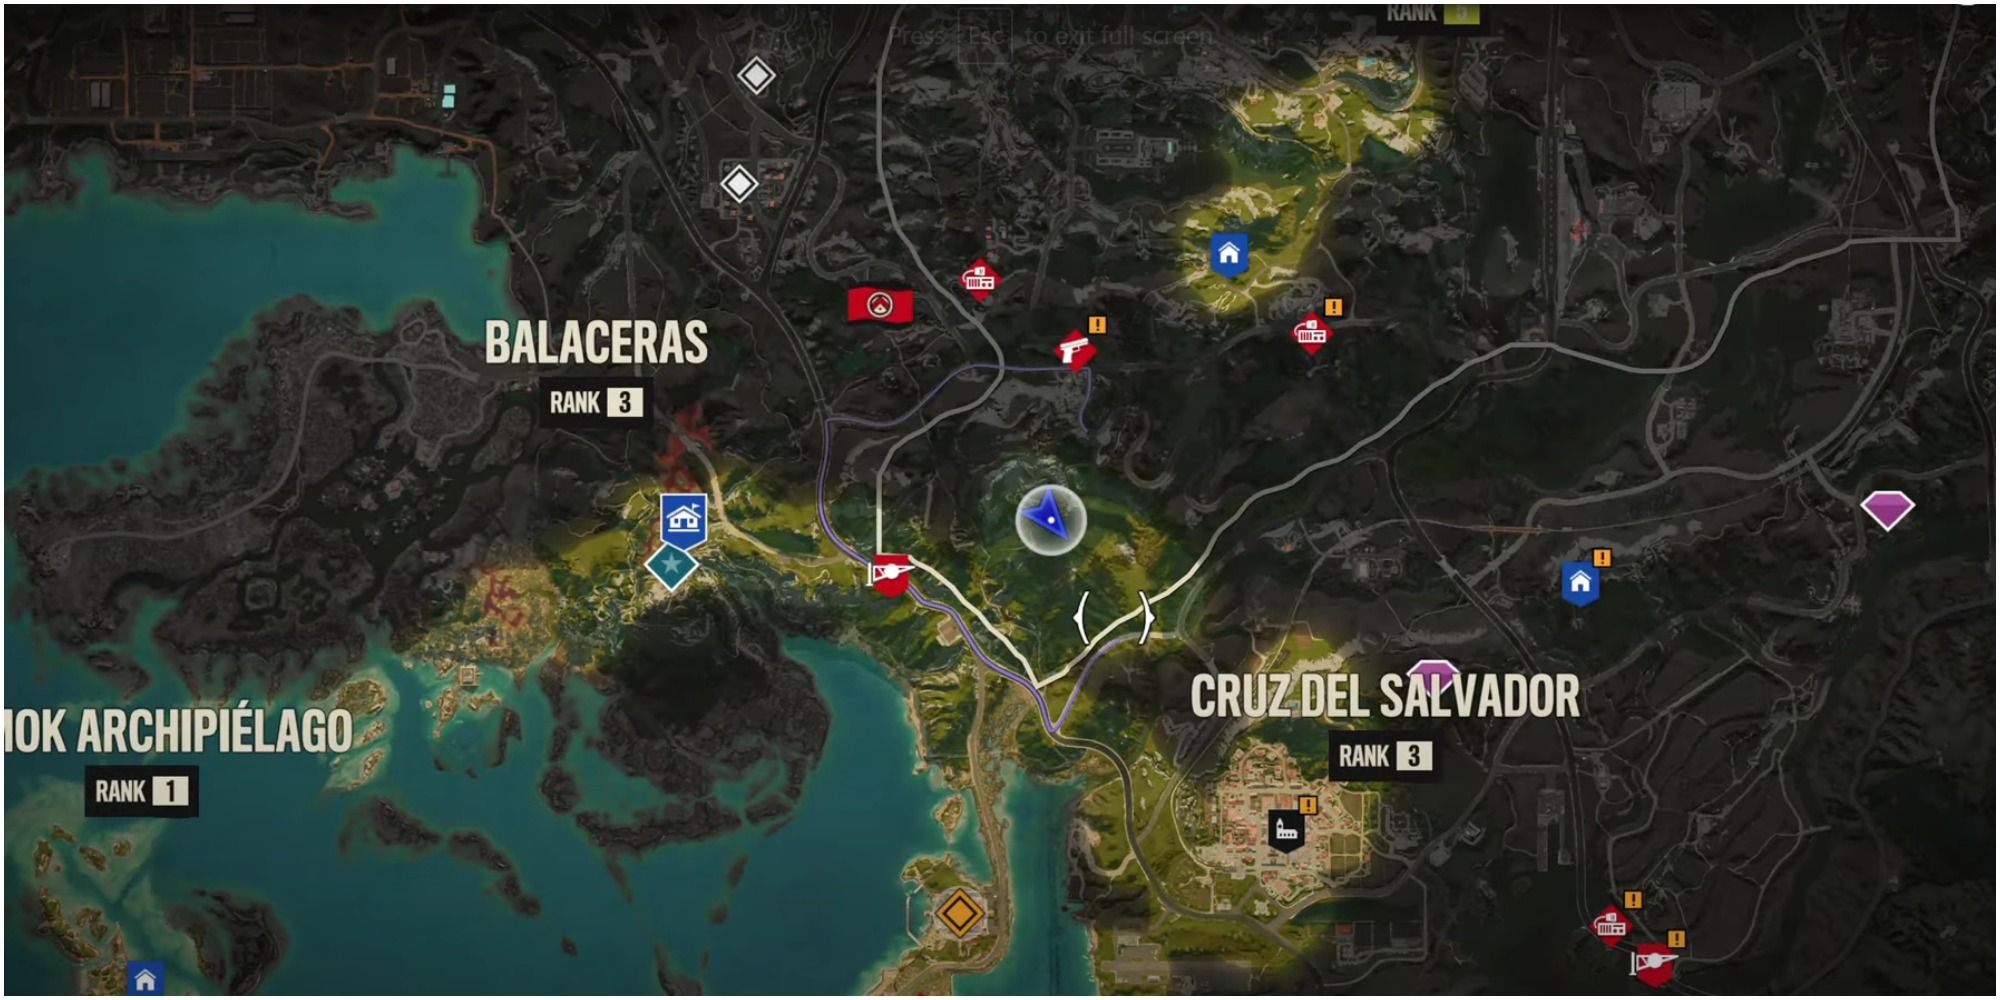 200m slide location on the map